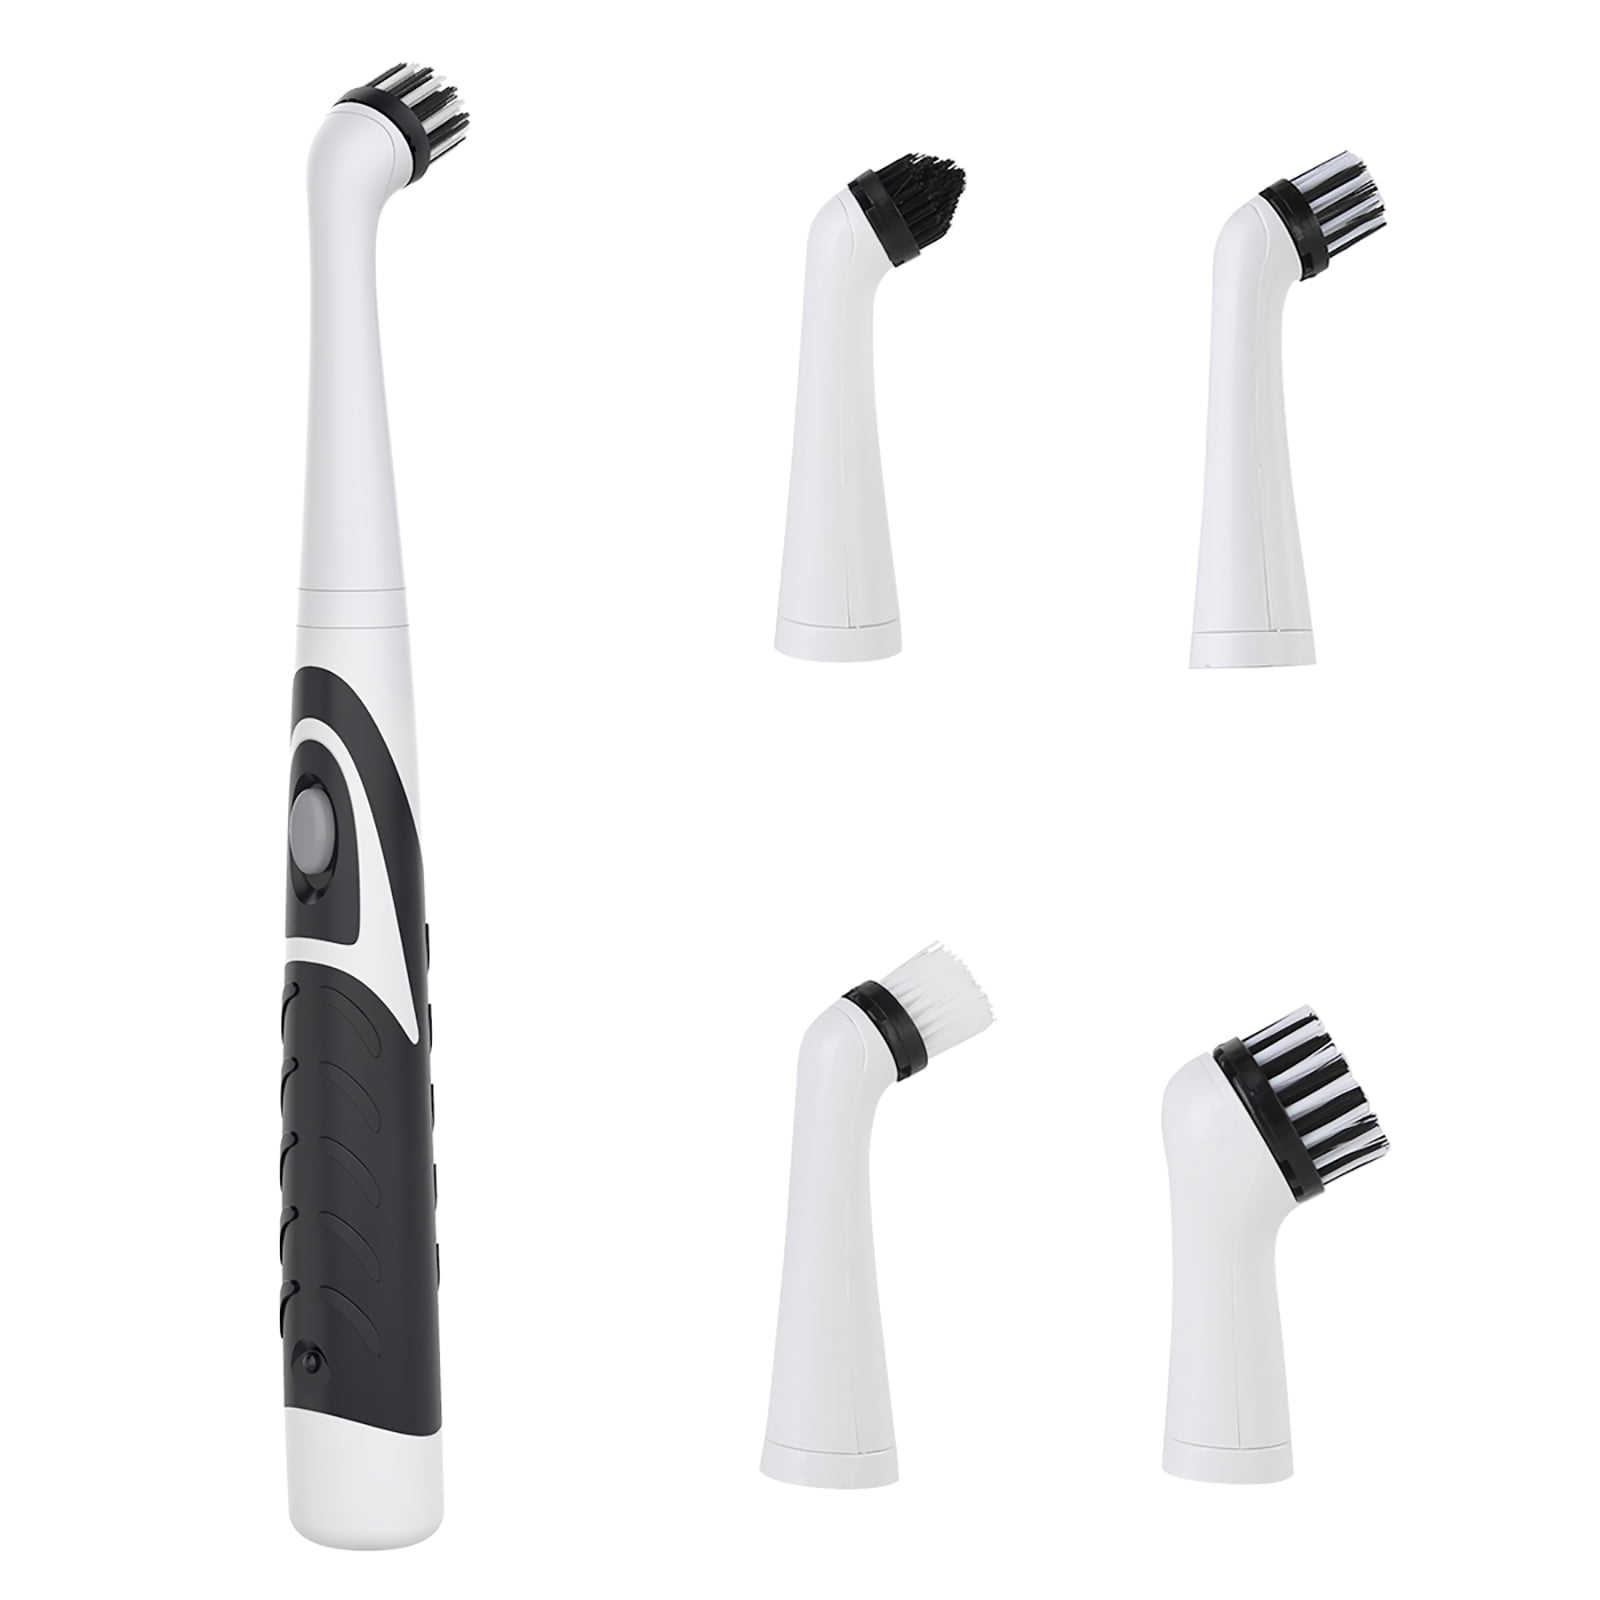 electric cleaning brush with Household All Purpose 4 Brush Heads by Sonic  Scrubber for Bathroom/Kitchen & Shoes Household power scrubber brush